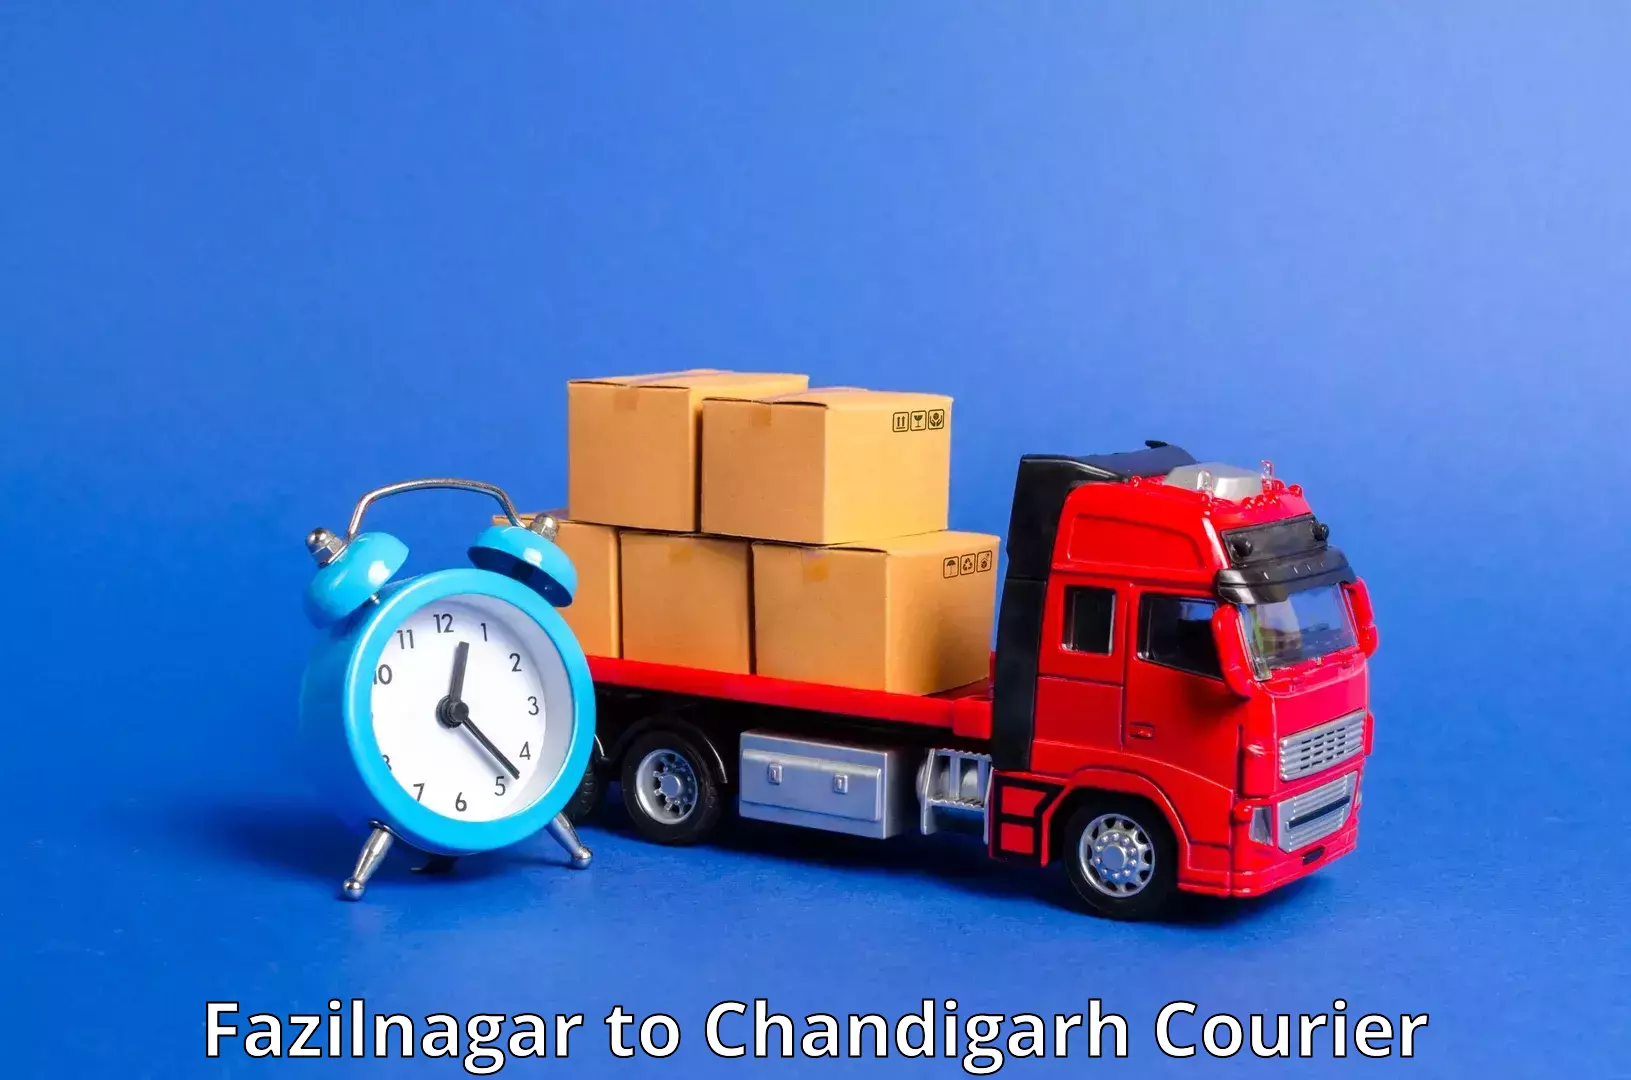 Local delivery service Fazilnagar to Chandigarh